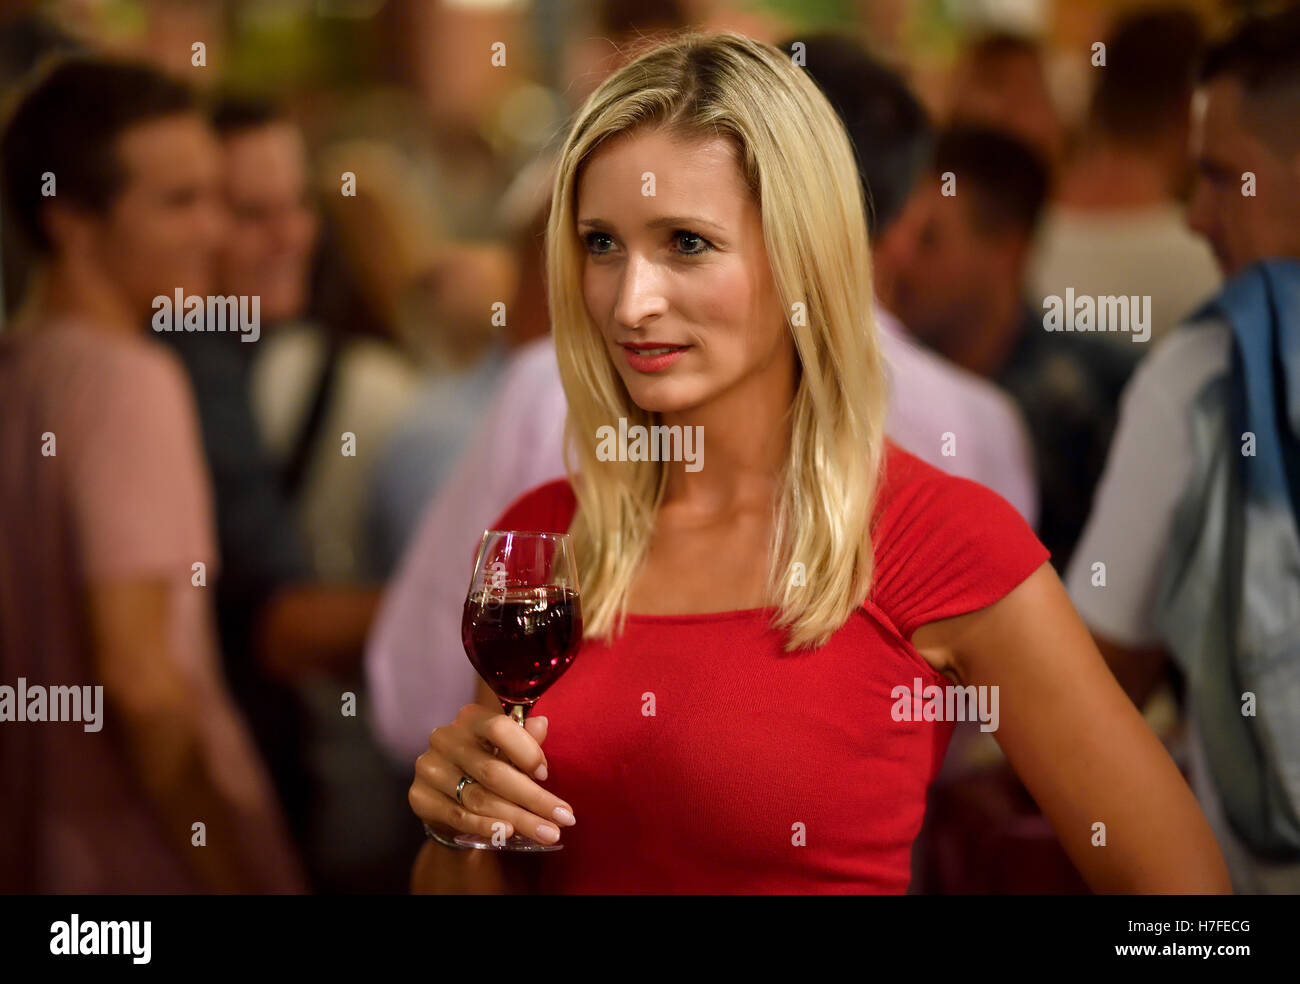 Frustrated woman with wine glass, group of men behind, Germany Stock Photo